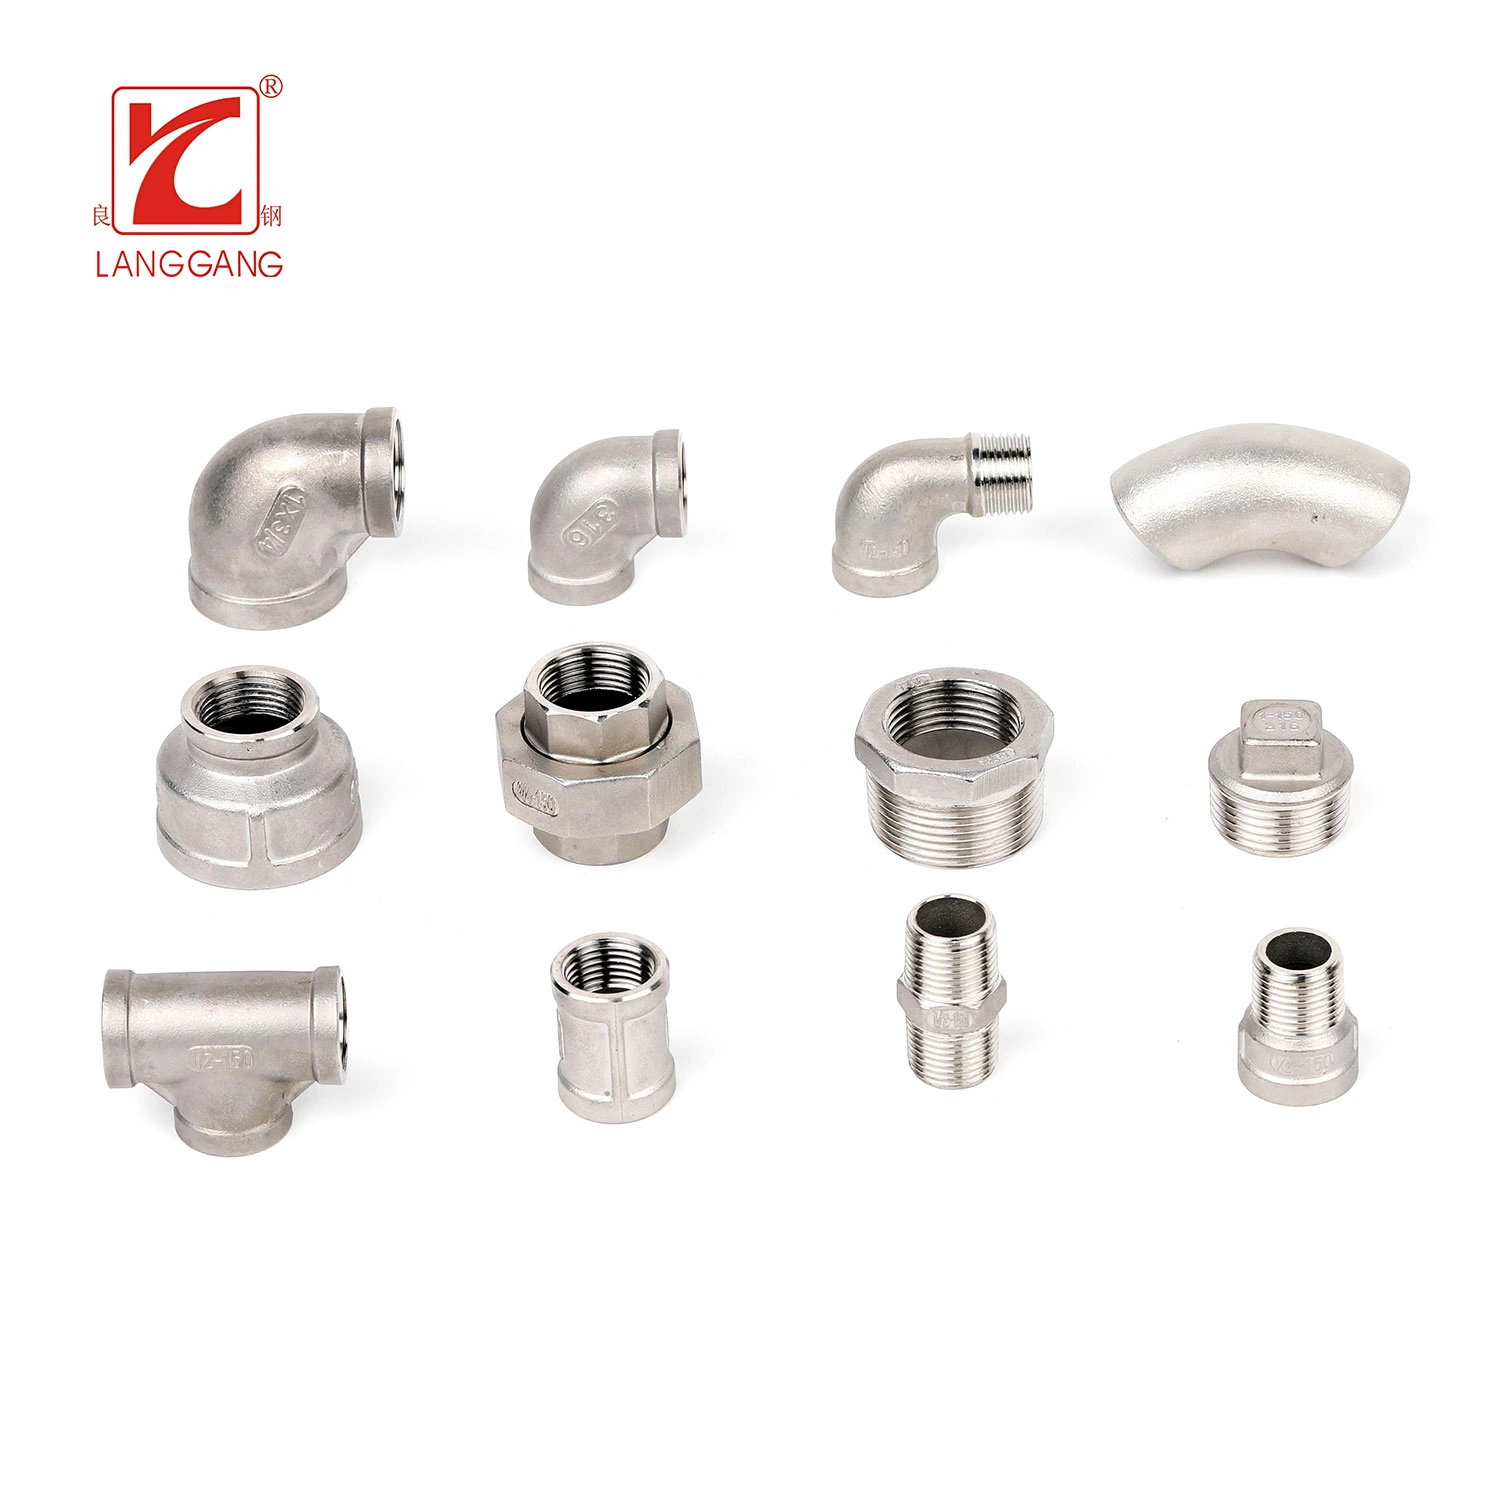 Forged Stainless Steel Square Plug Pipe Fittings High Pressure Male Thread Connectors